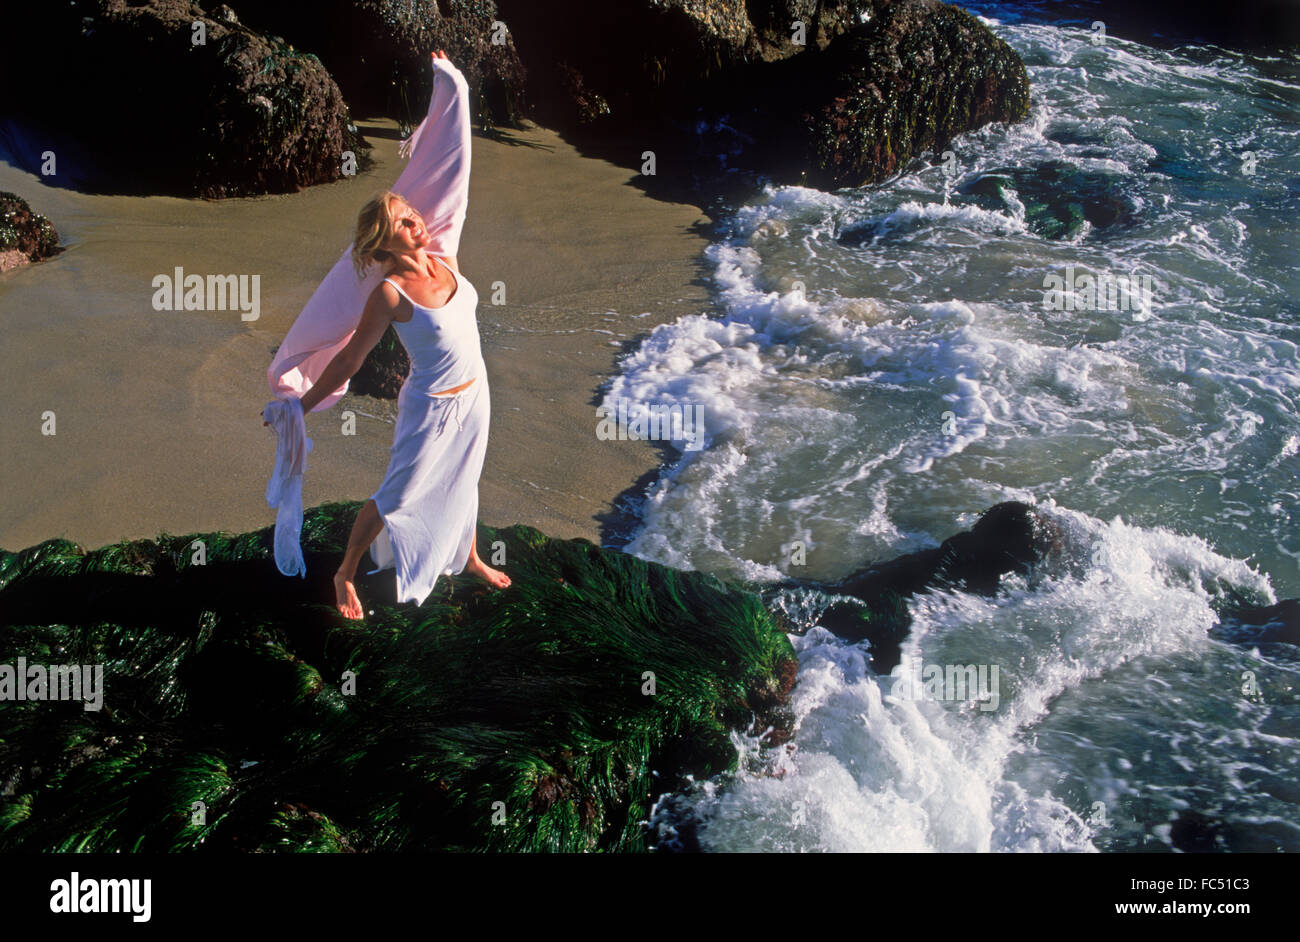 Woman in white dress enjoying life on wave swept rocky shore in California Stock Photo